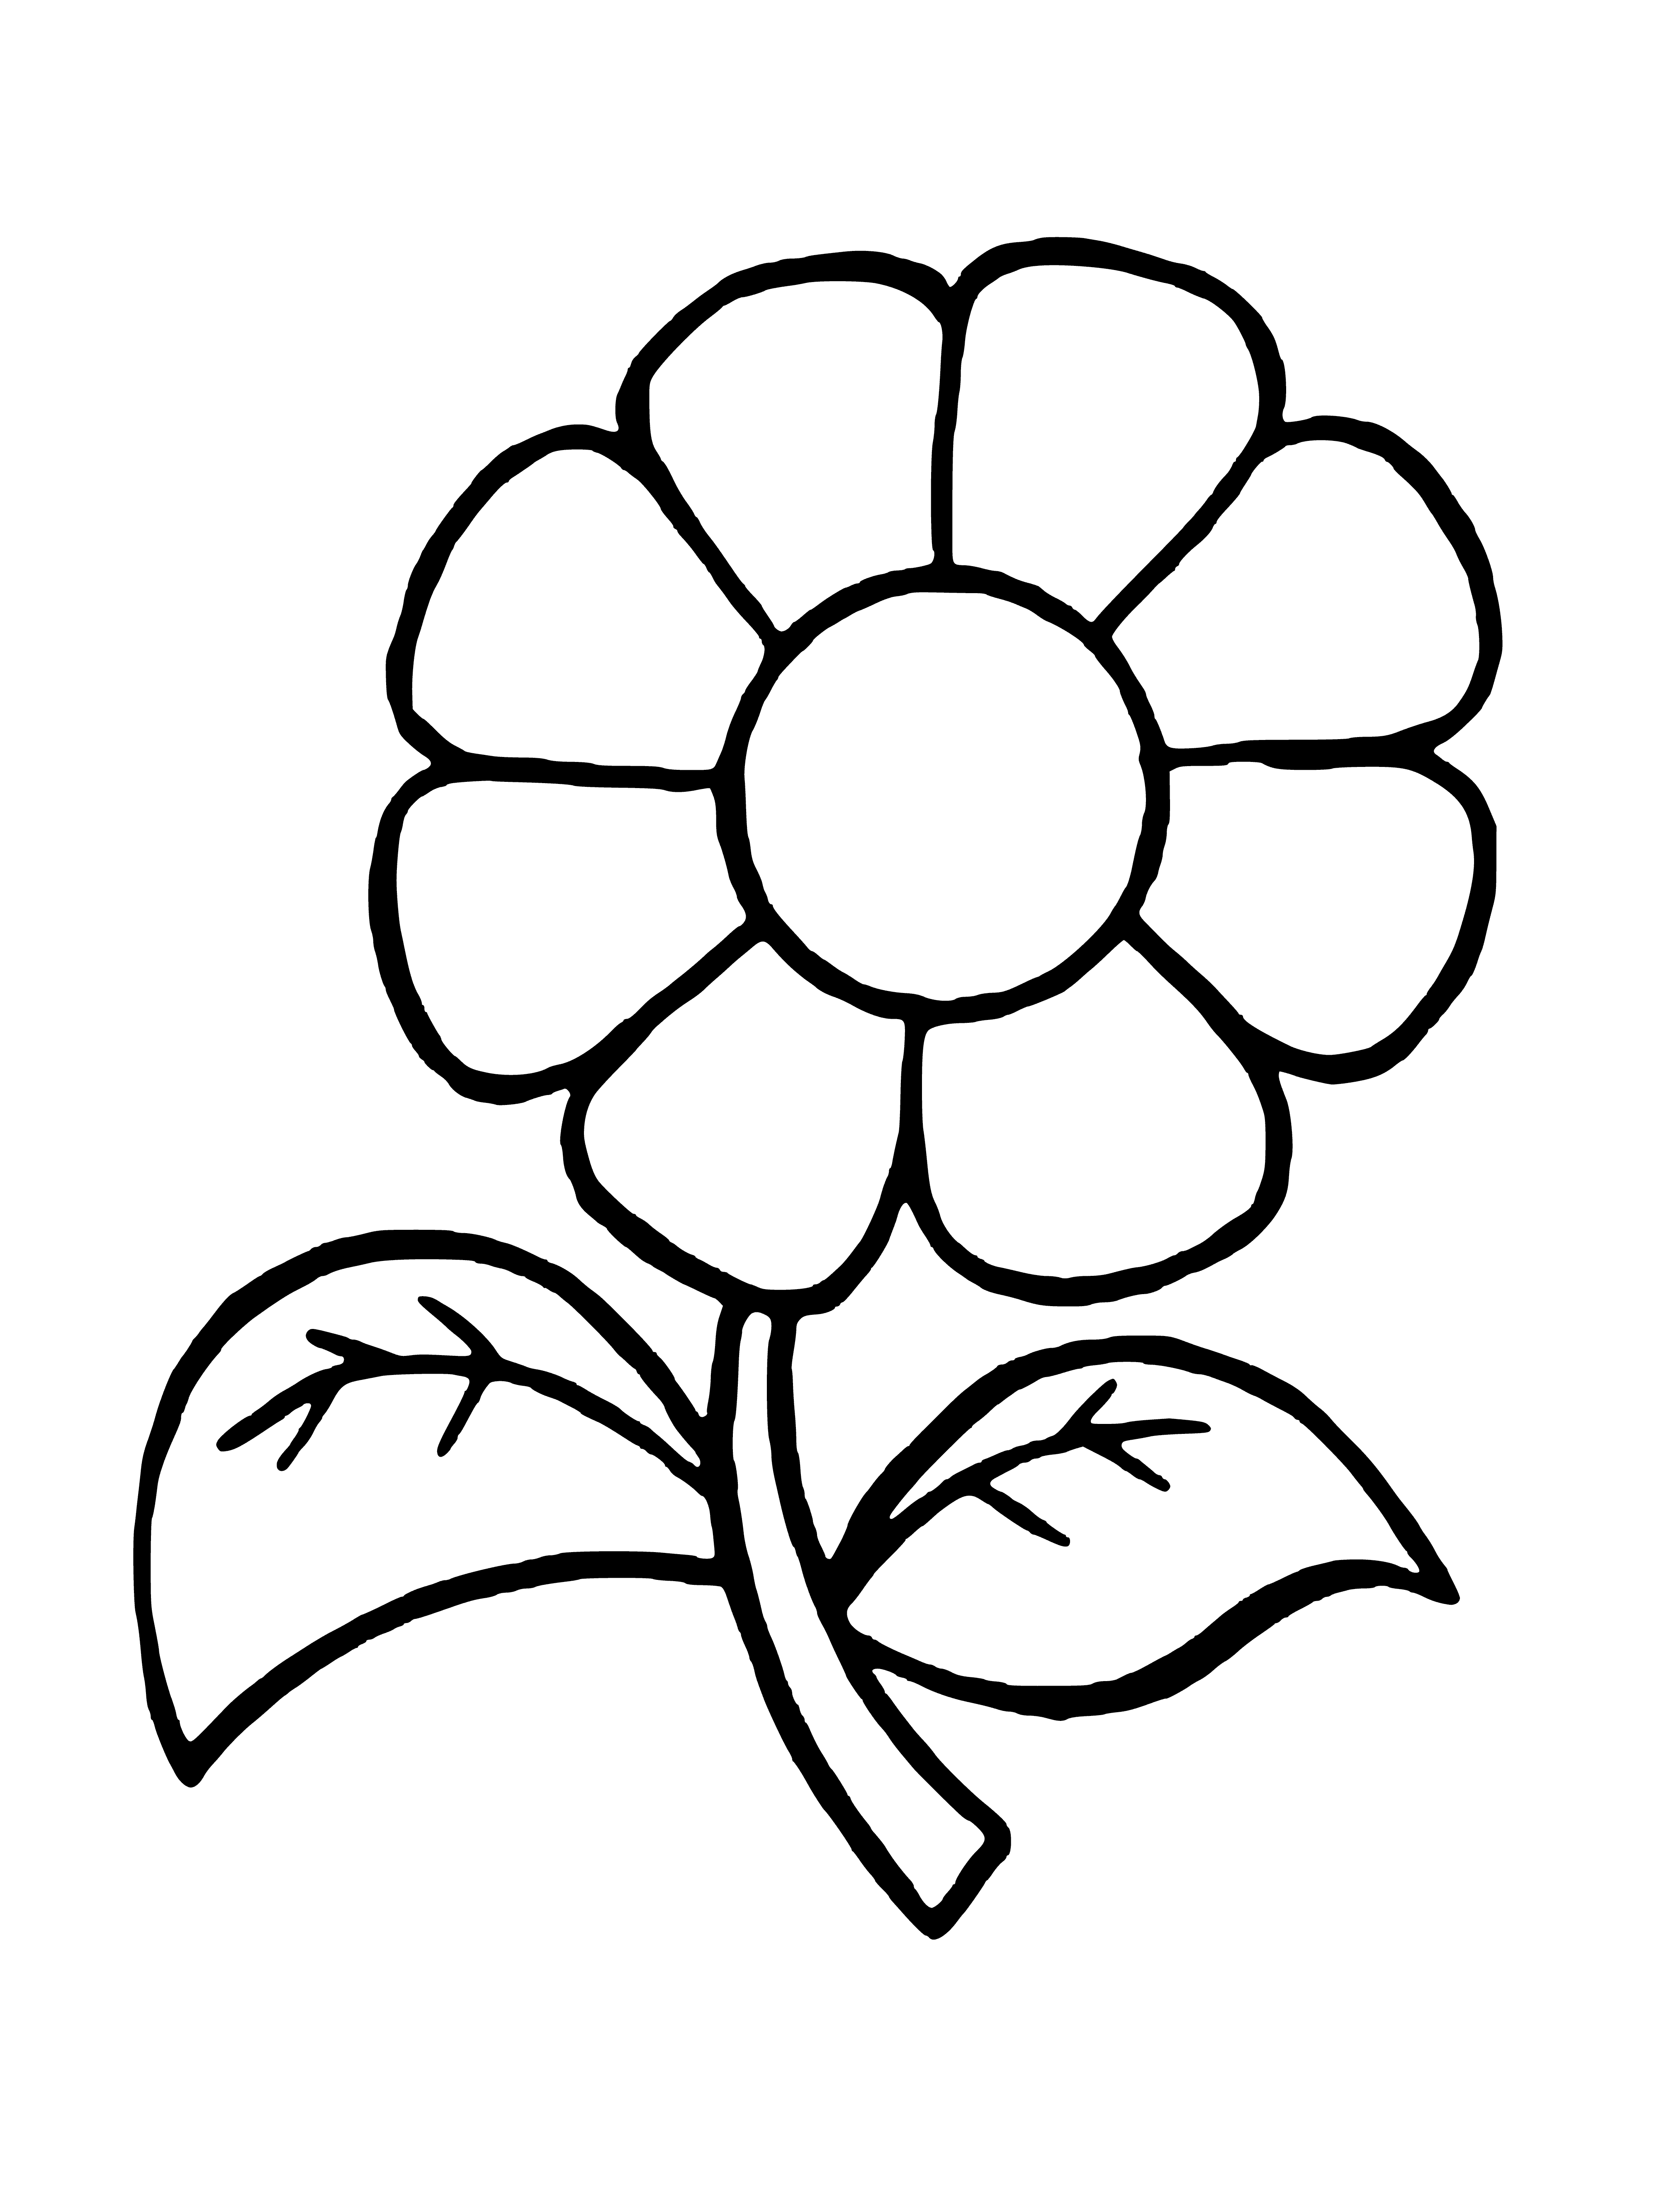 coloring page: Five flowers-yellow in middle, four white around it-all have green stems. #flowerpower